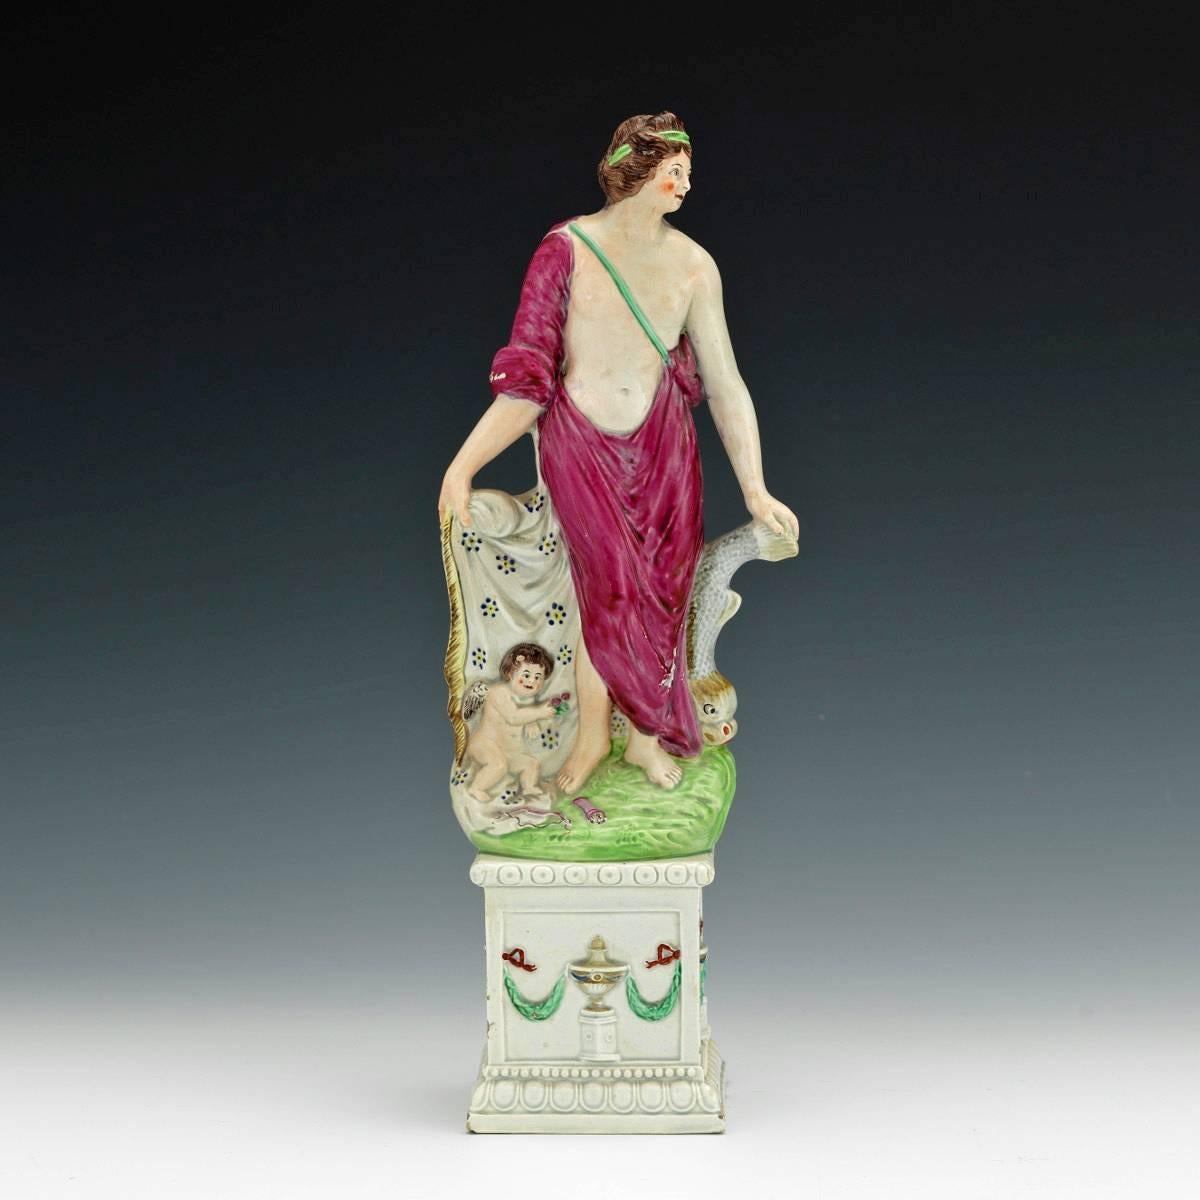 Great Pearlware Figure of Aphrodite & Eros, 'Venus and Cupid' Figure attributed to Neale & Co,
circa 1790.

The large pearlware early English pearlware figure of Venus or Aphrodite rests her left hand on a dolphin and her right hand holding the